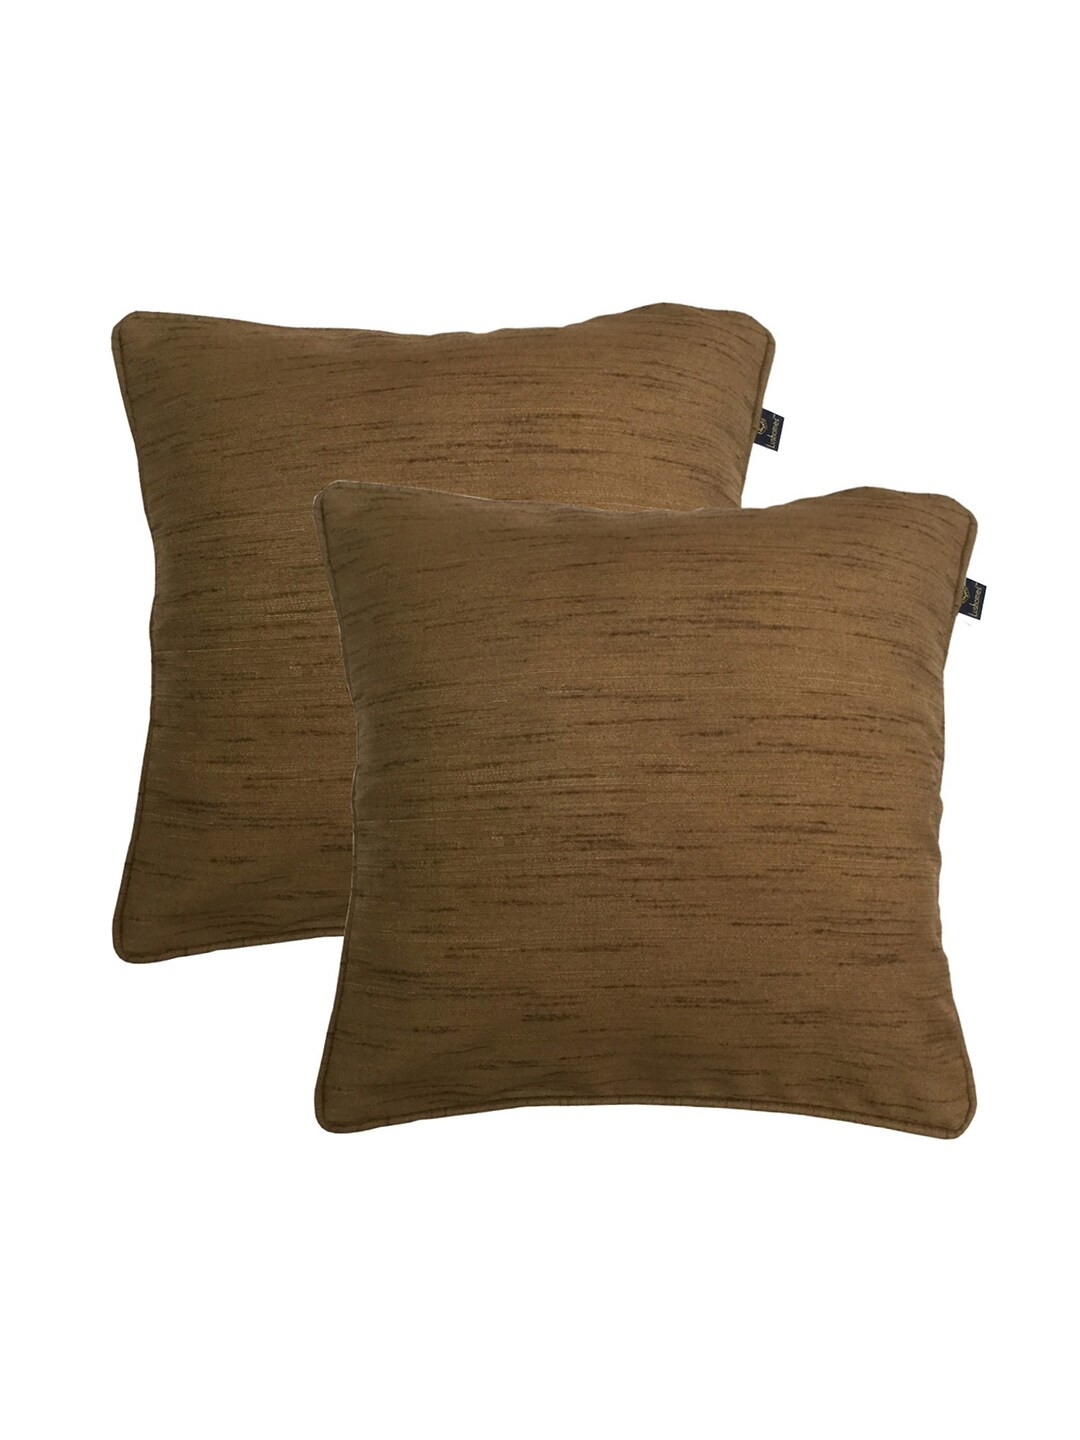 Lushomes Set Of 2 Beige Solid Square Cushion Covers Price in India